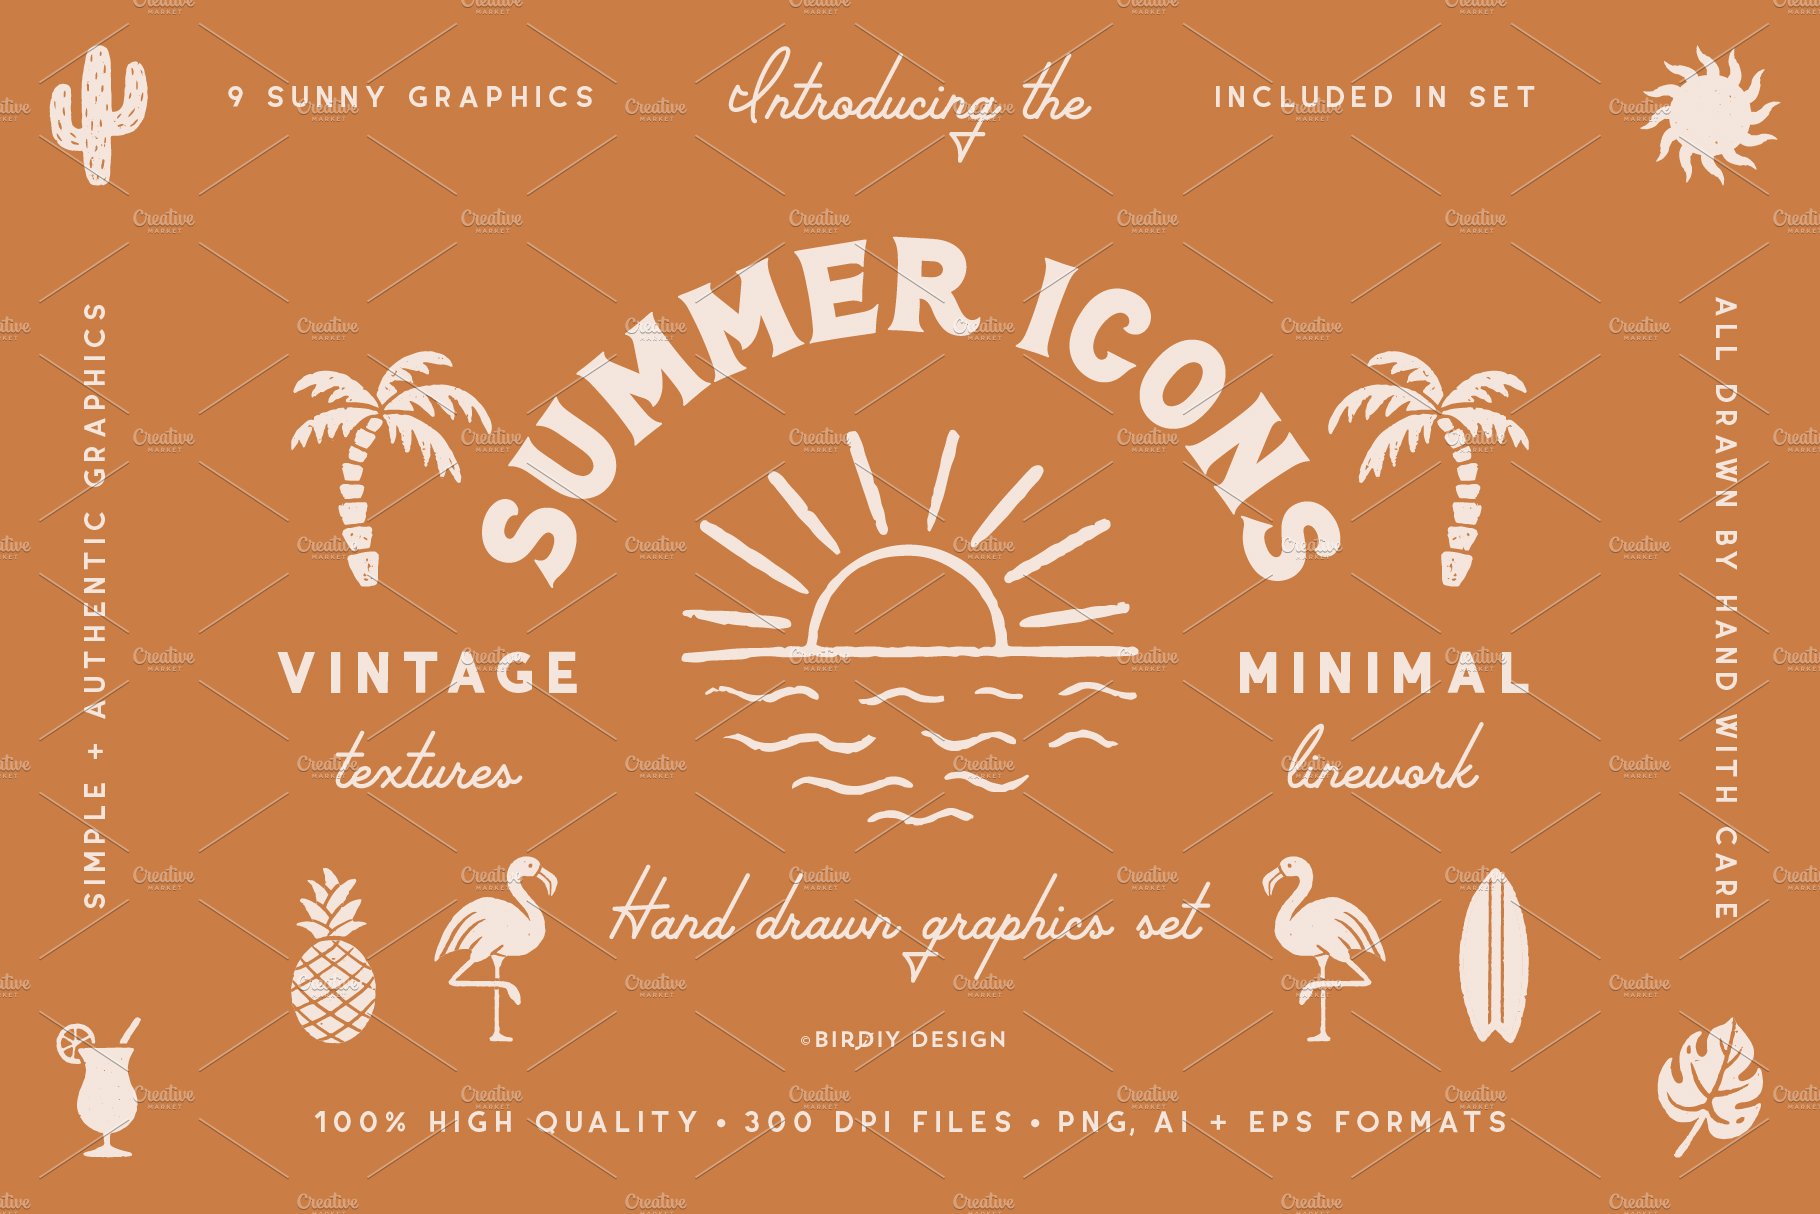 Summer Icons Hand Drawn Graphics Set cover image.